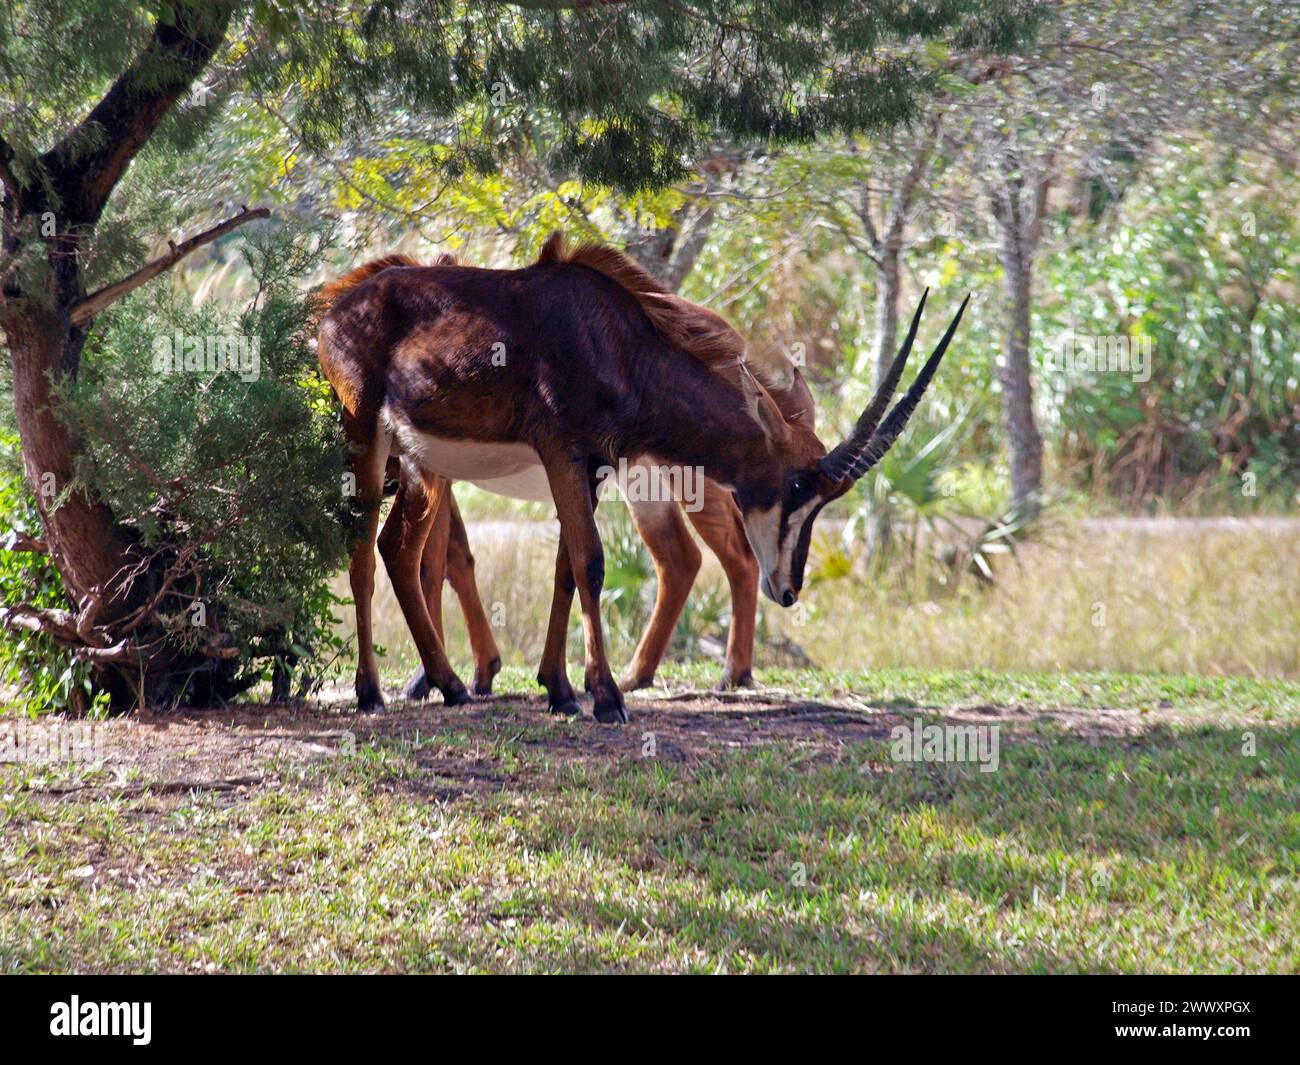 Sable antelope (Hippotragus niger). It's native from southern and eastern Africa. Stock Photo